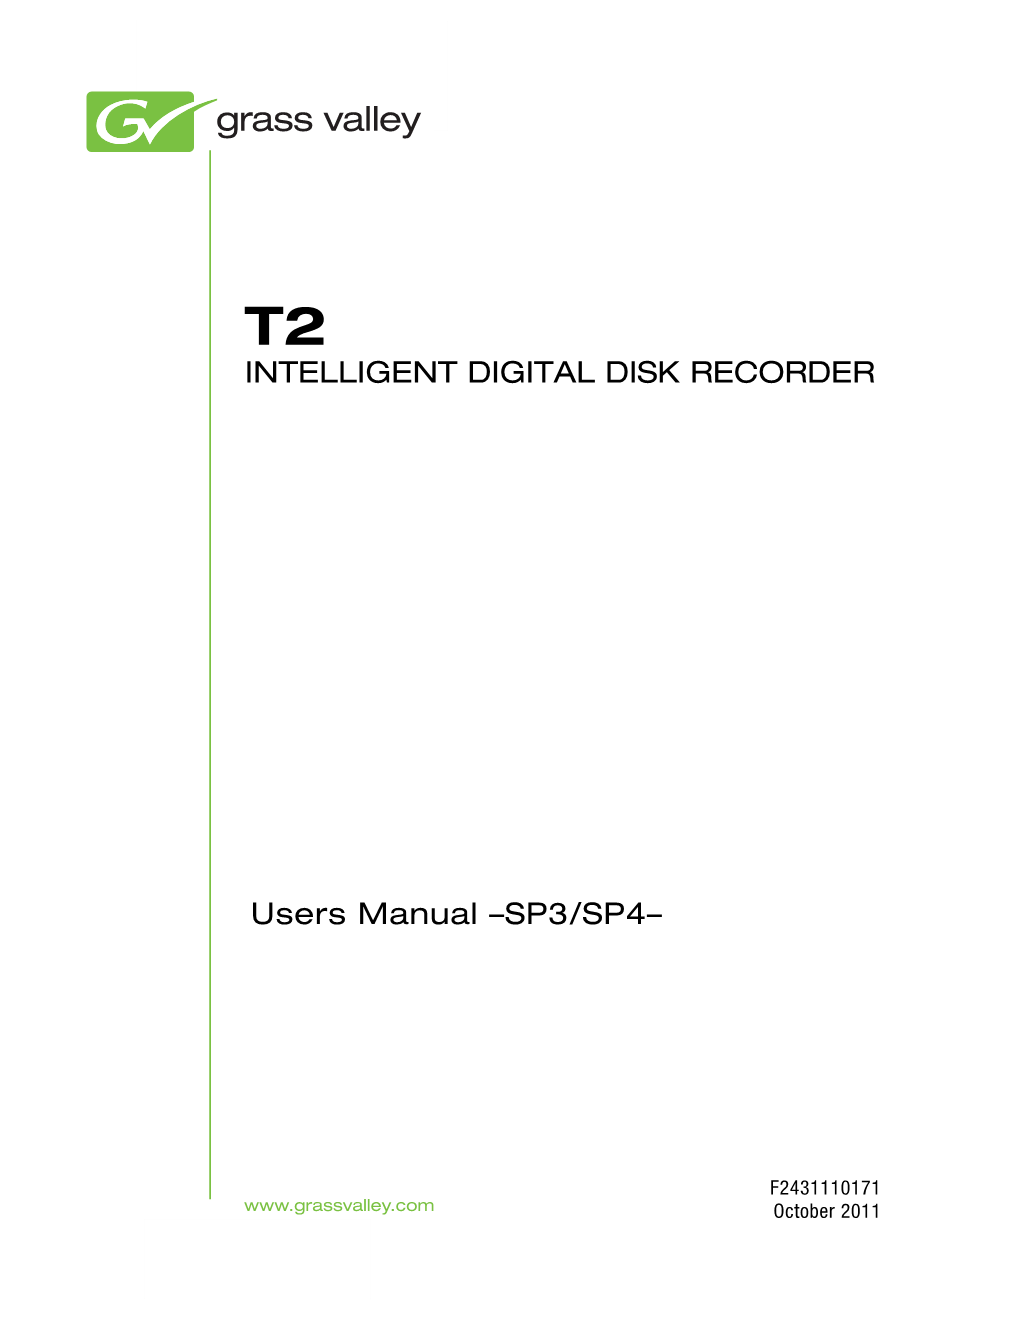 T2 Users Manual -SP3/SP4